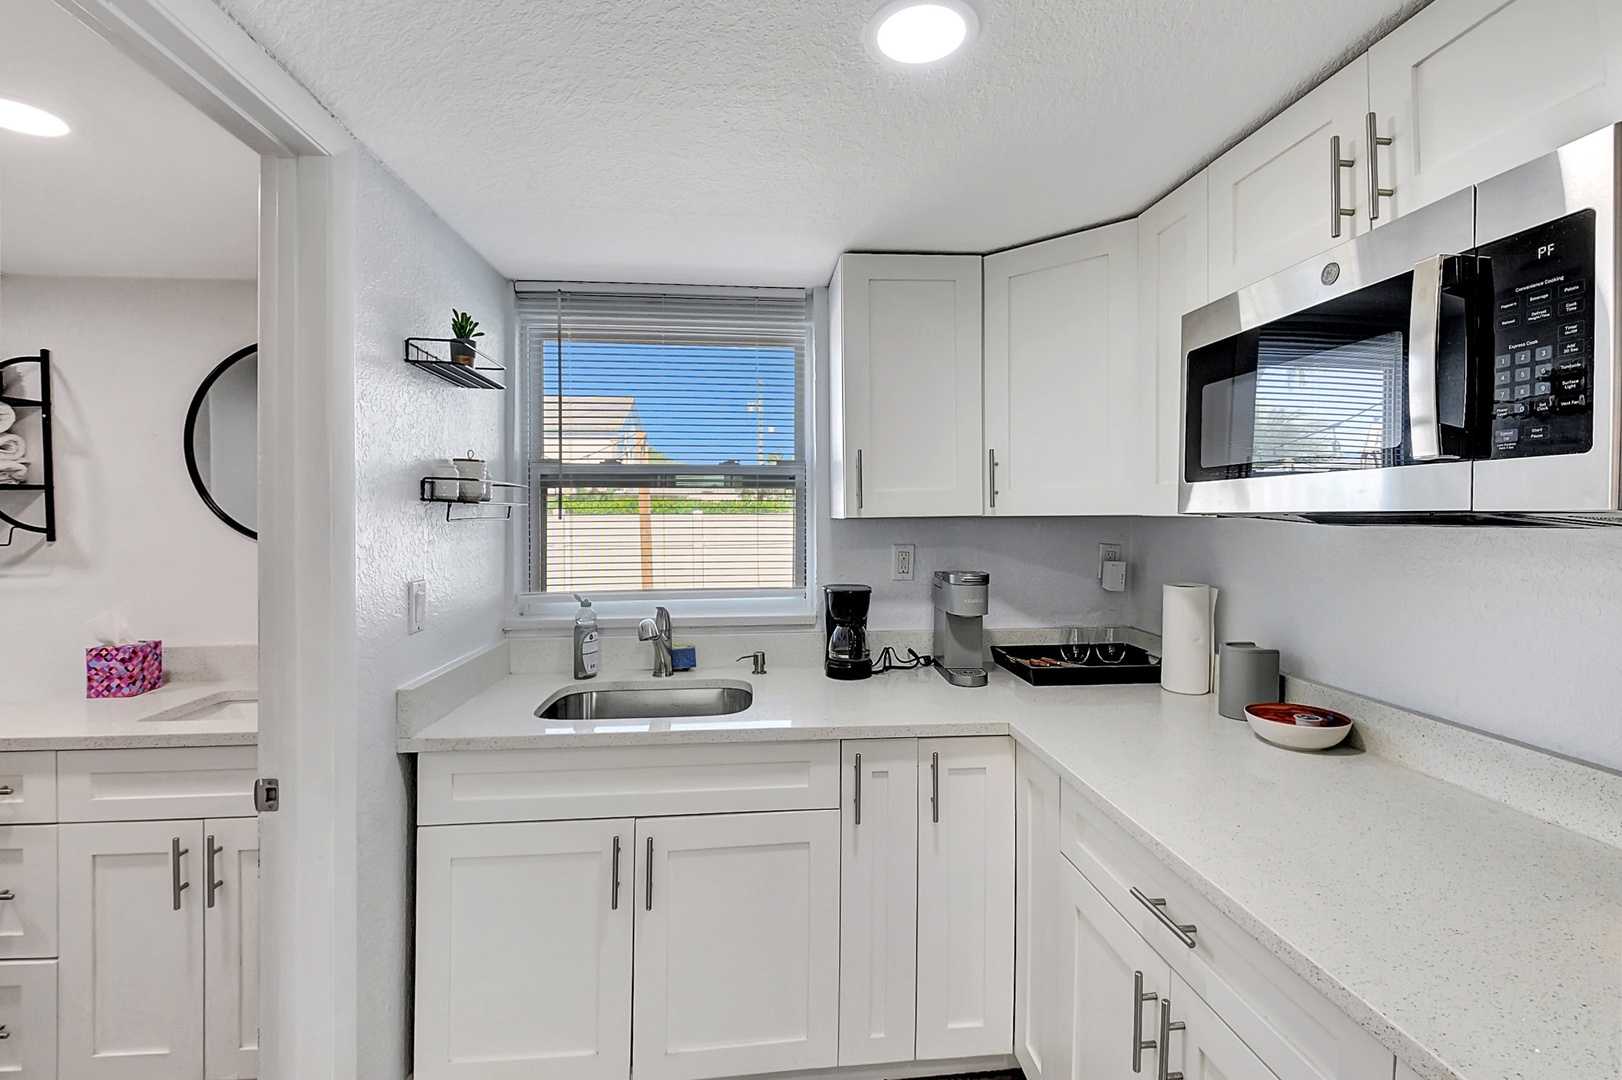 Cottage - The streamlined kitchen is well-equipped for your visit